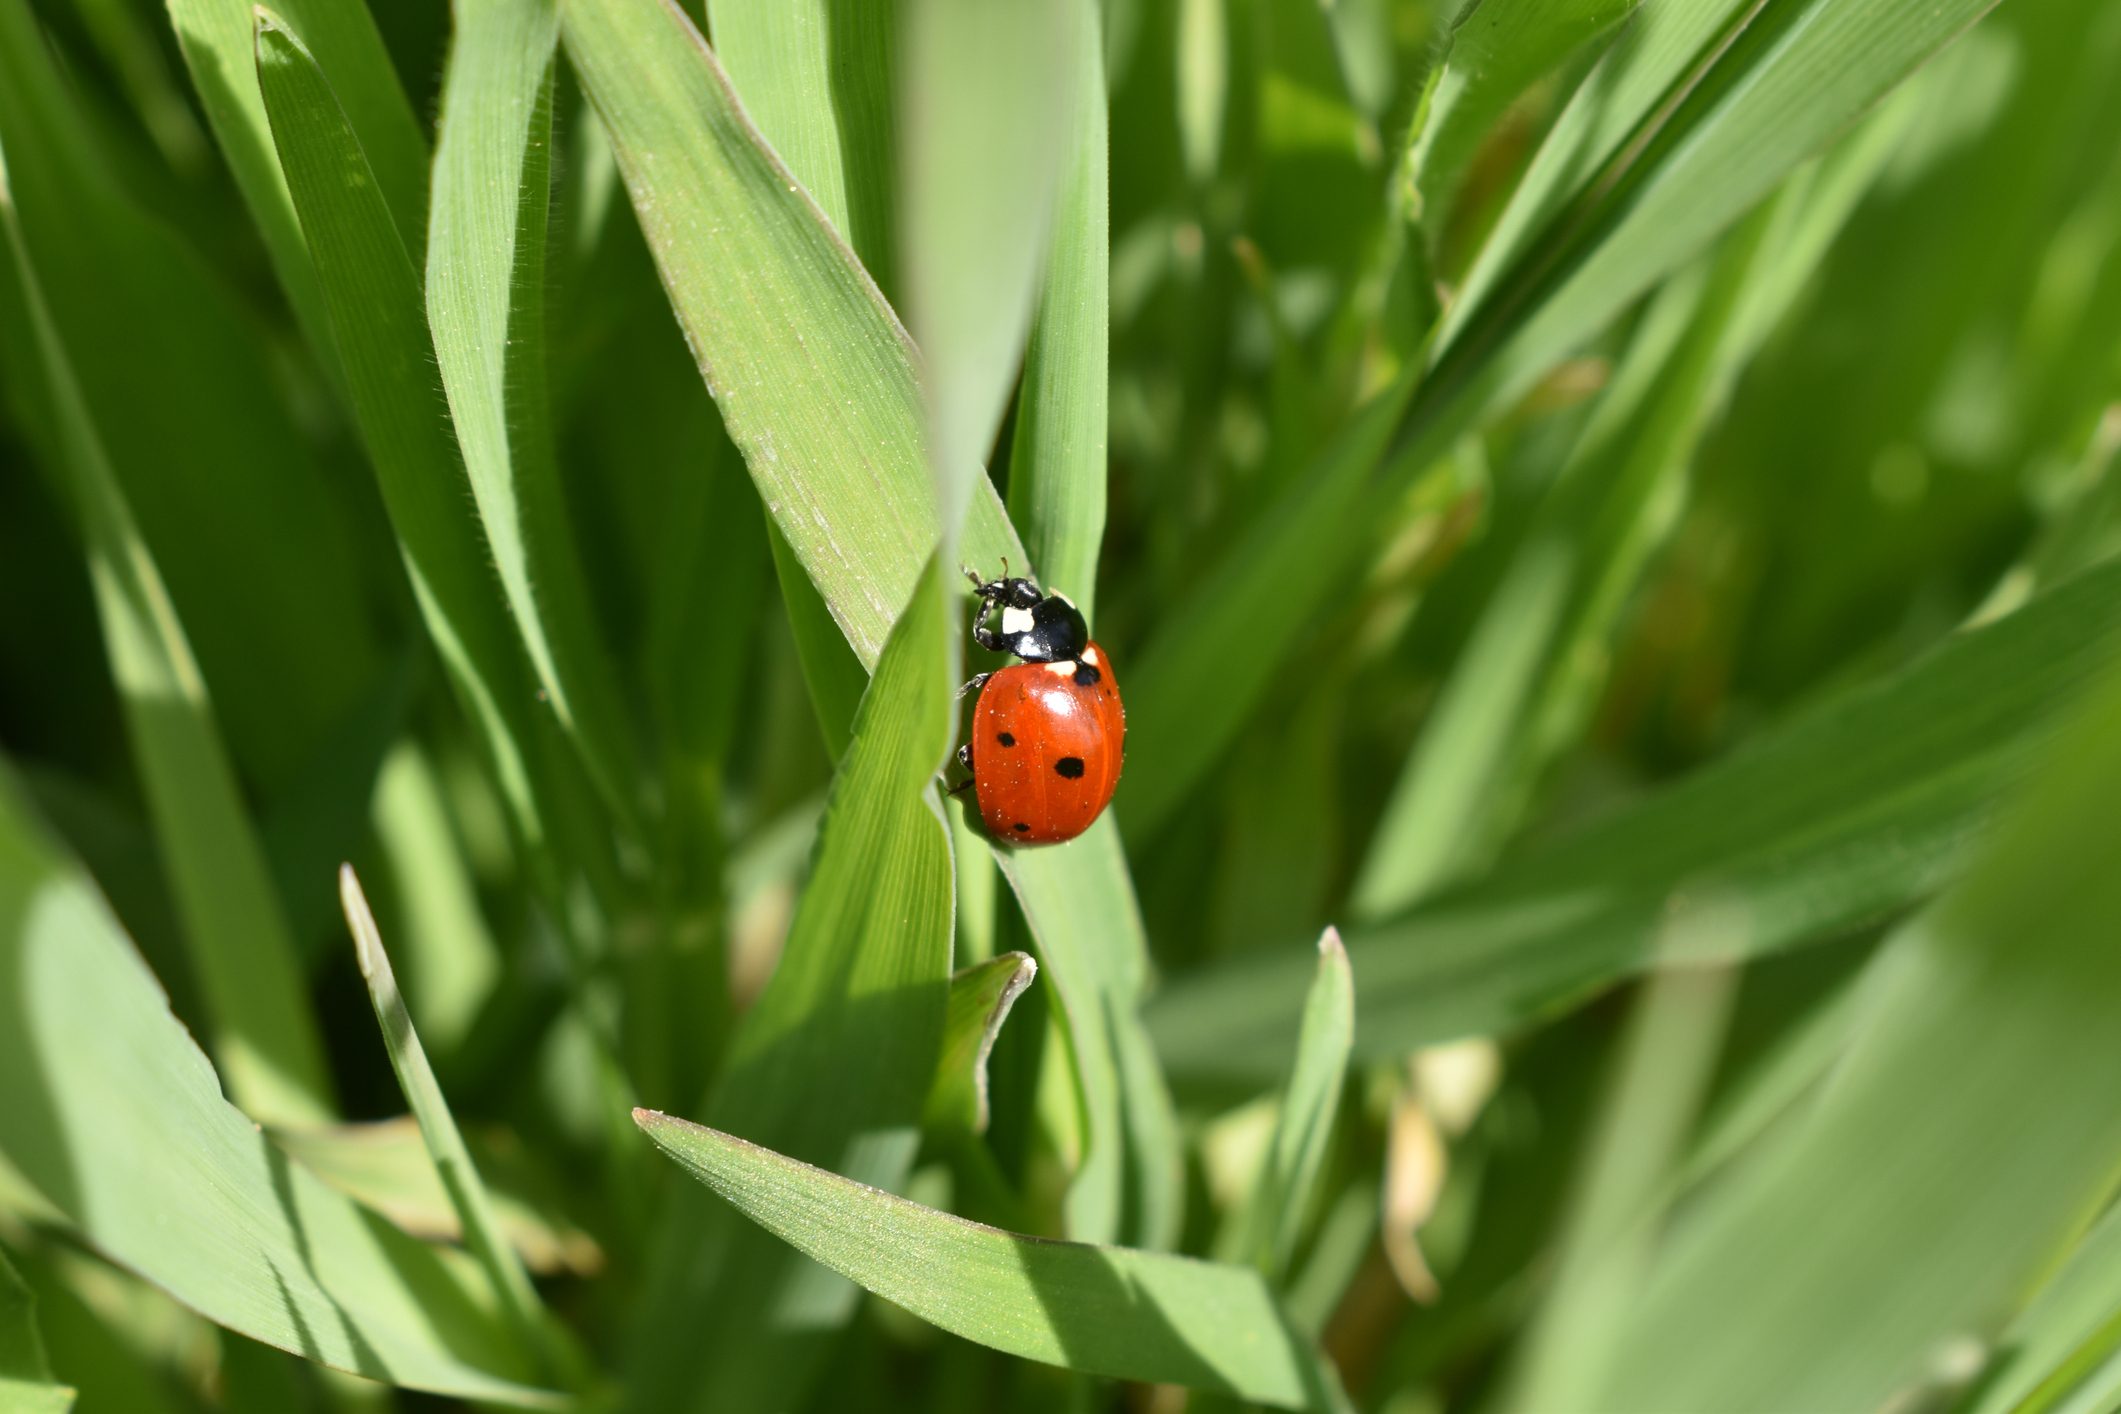 close up of a lady bug on a blade of grass